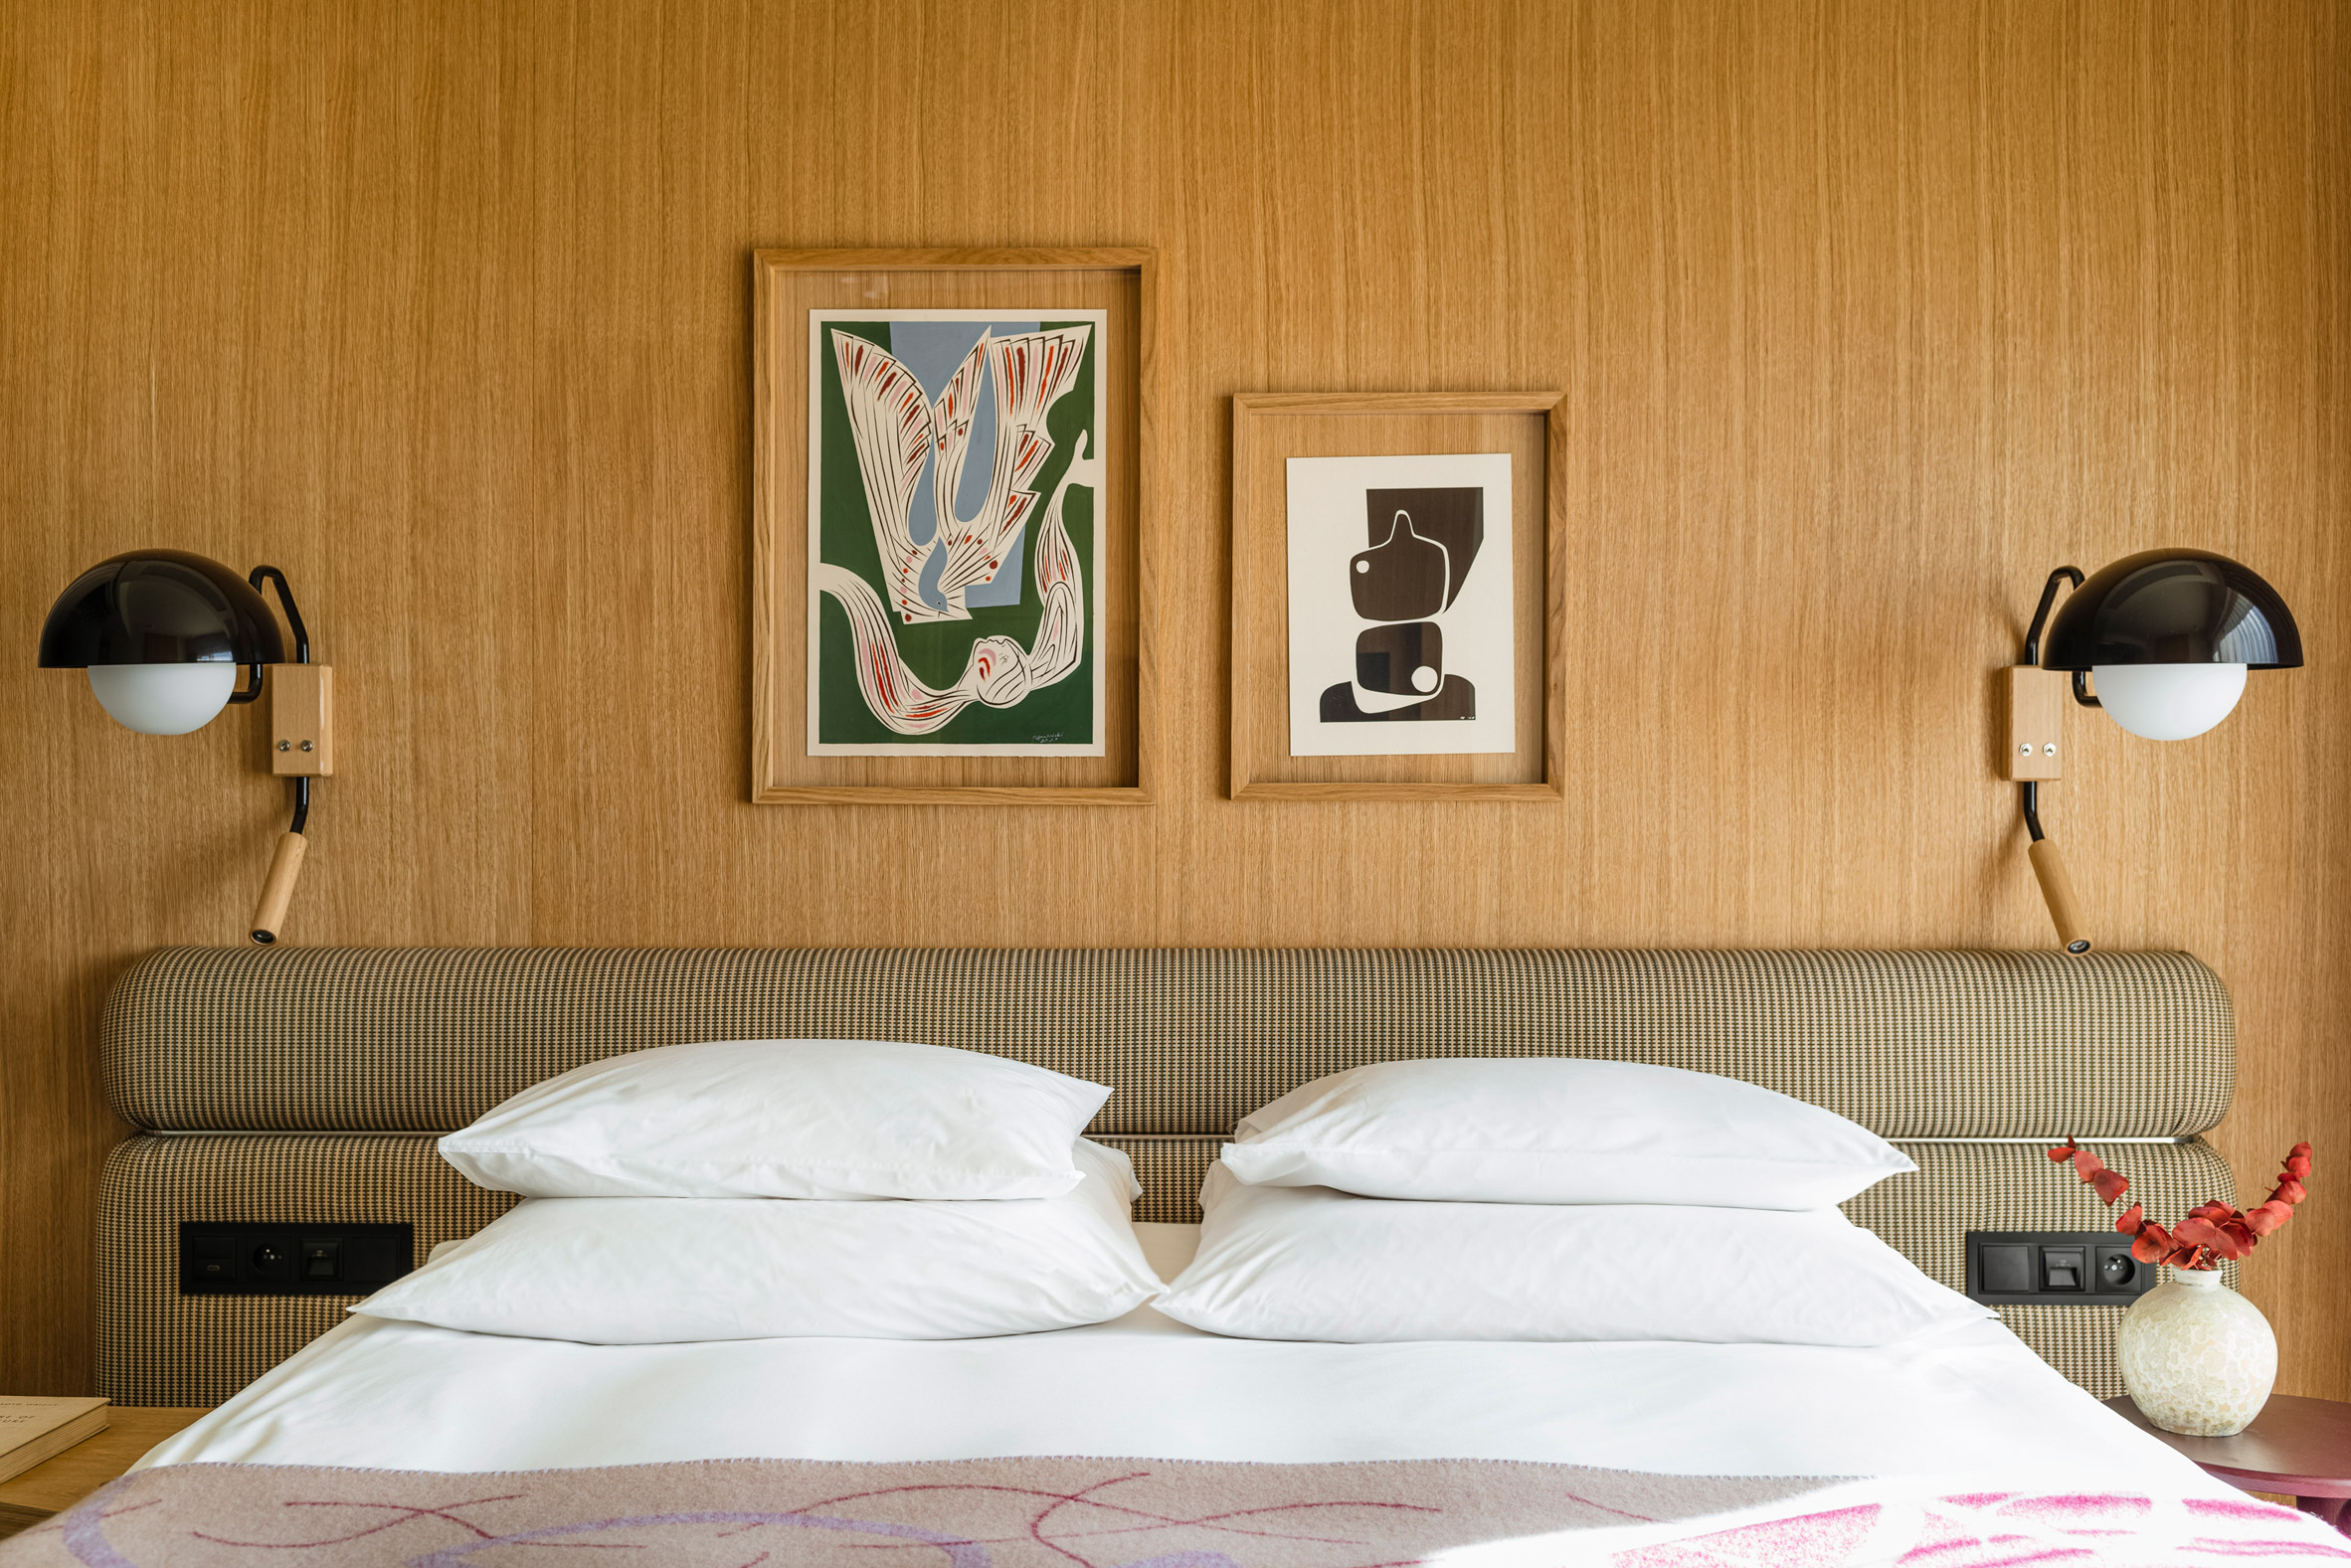 Bedroom with wooden wall panelling in hotel interior by Studio Paradowski